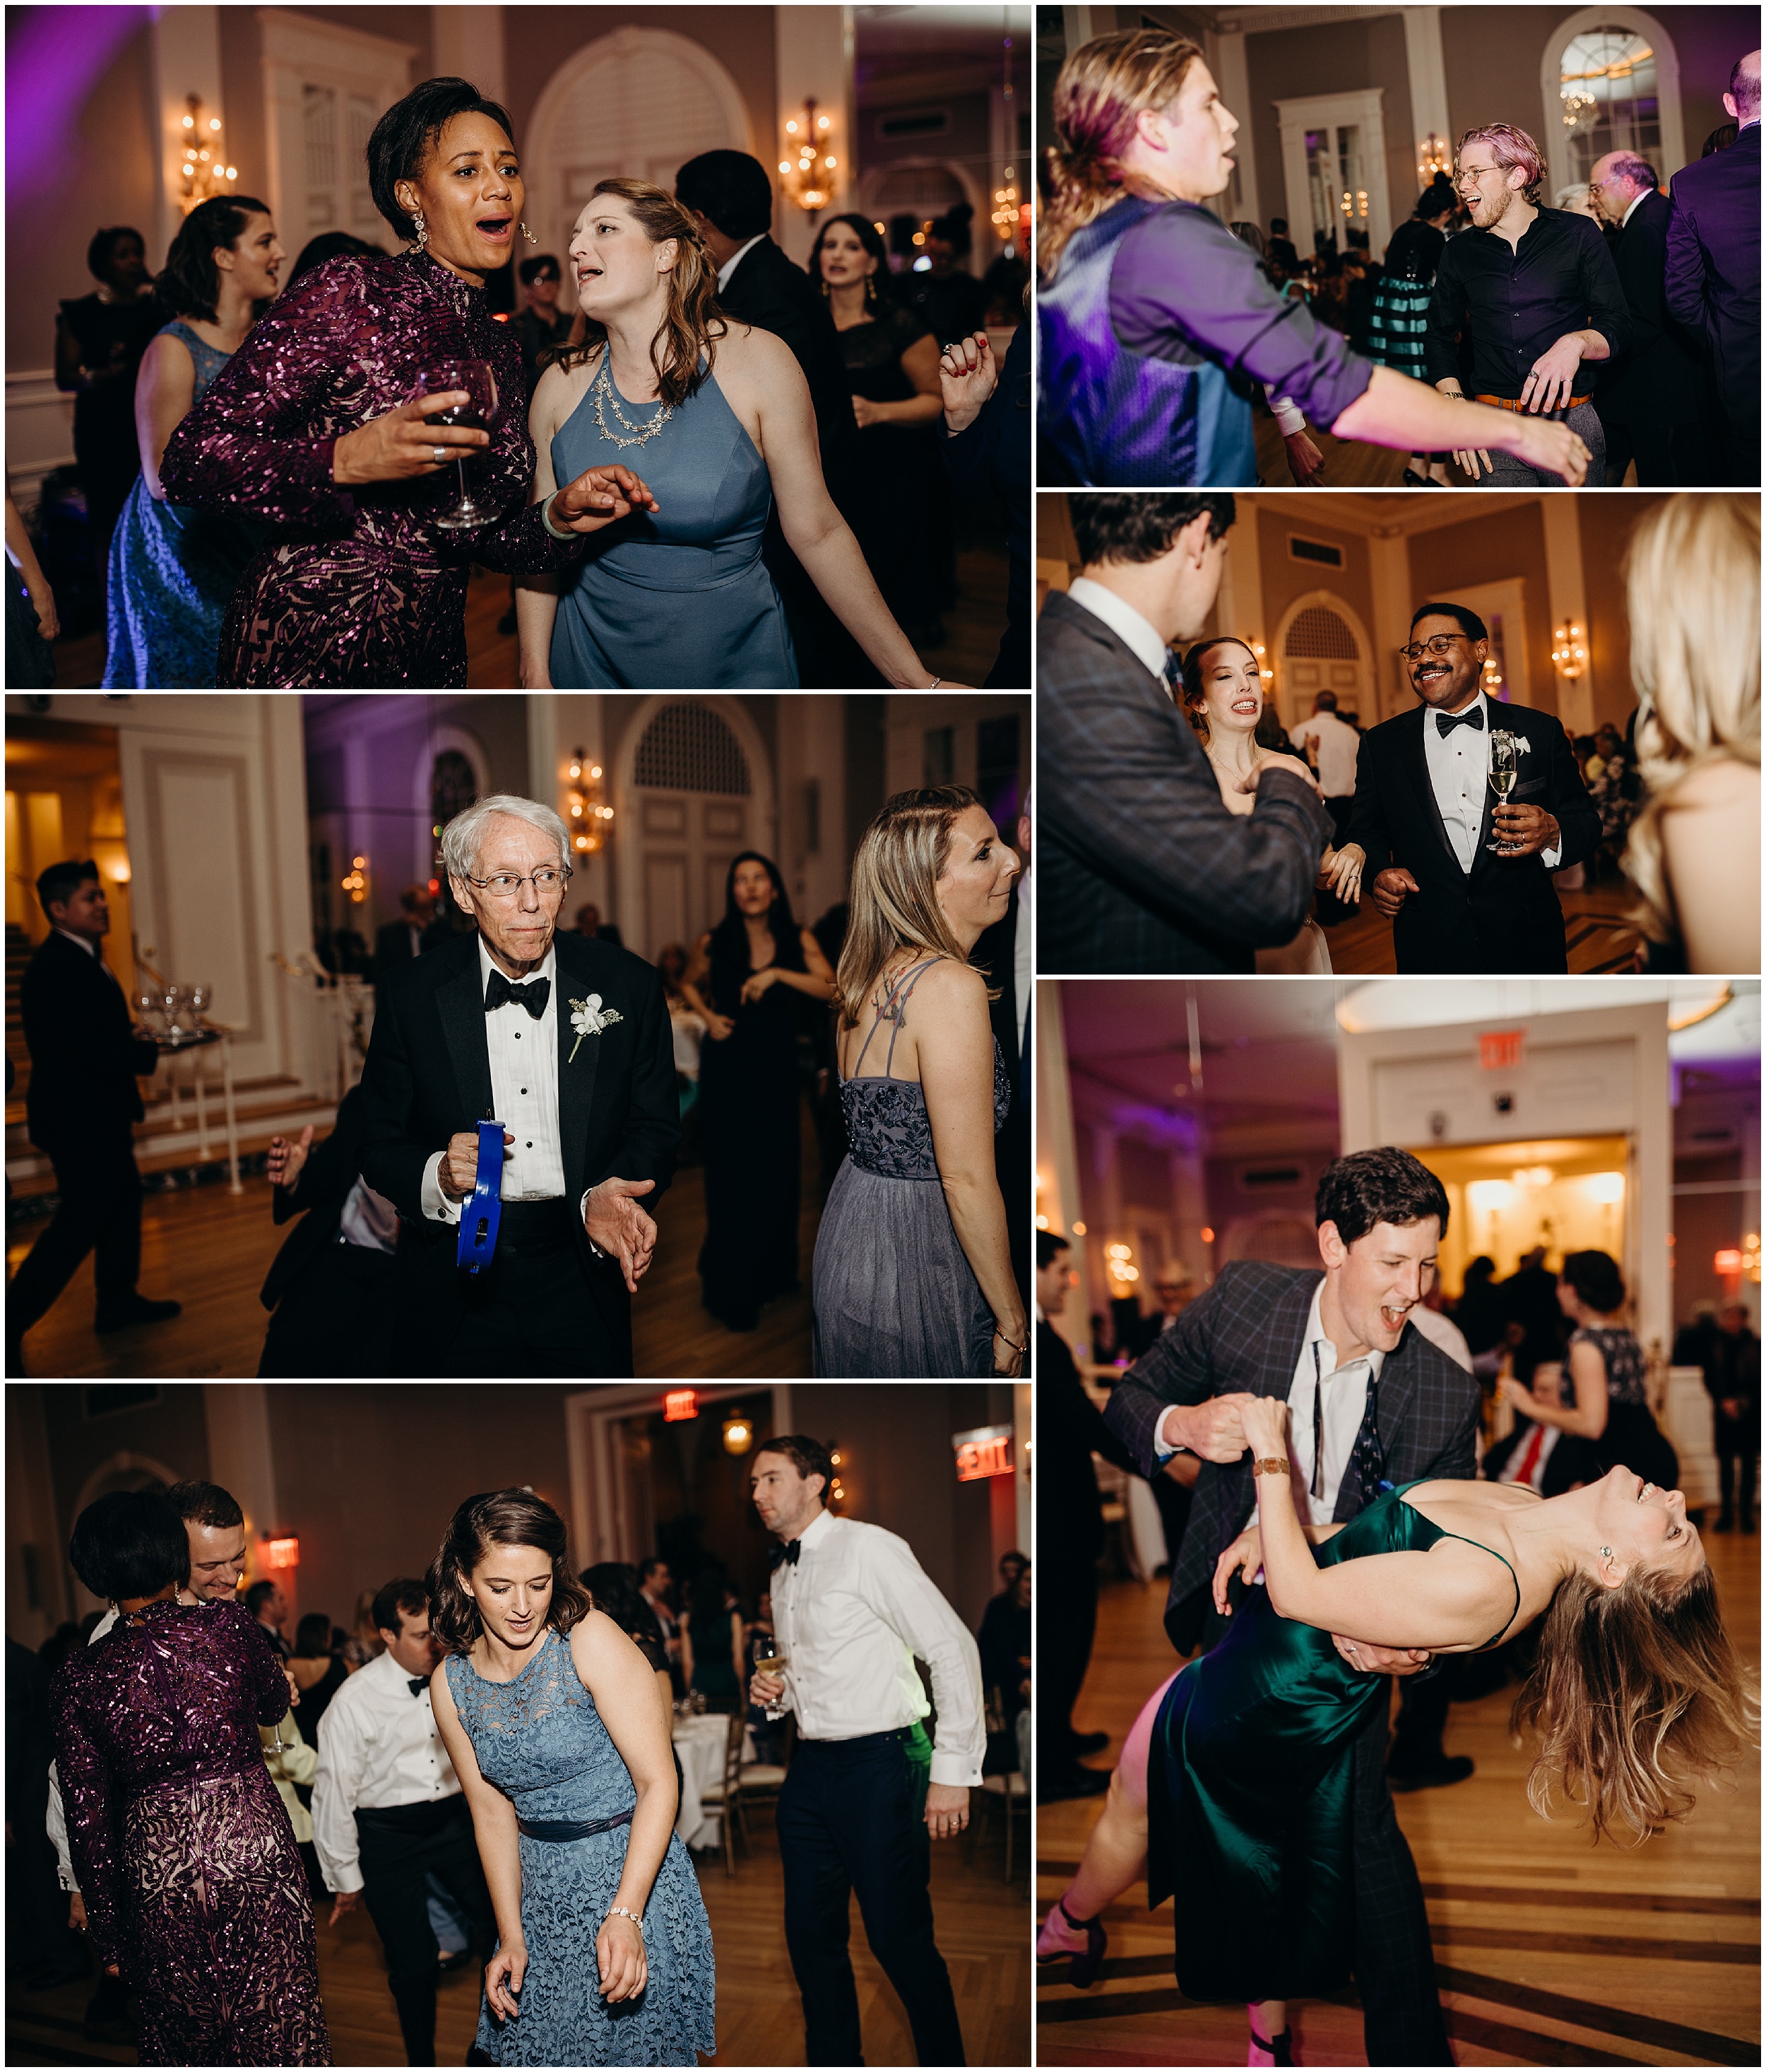 wedding guests dance during wedding reception at cosmopolitan club in new york city, ny